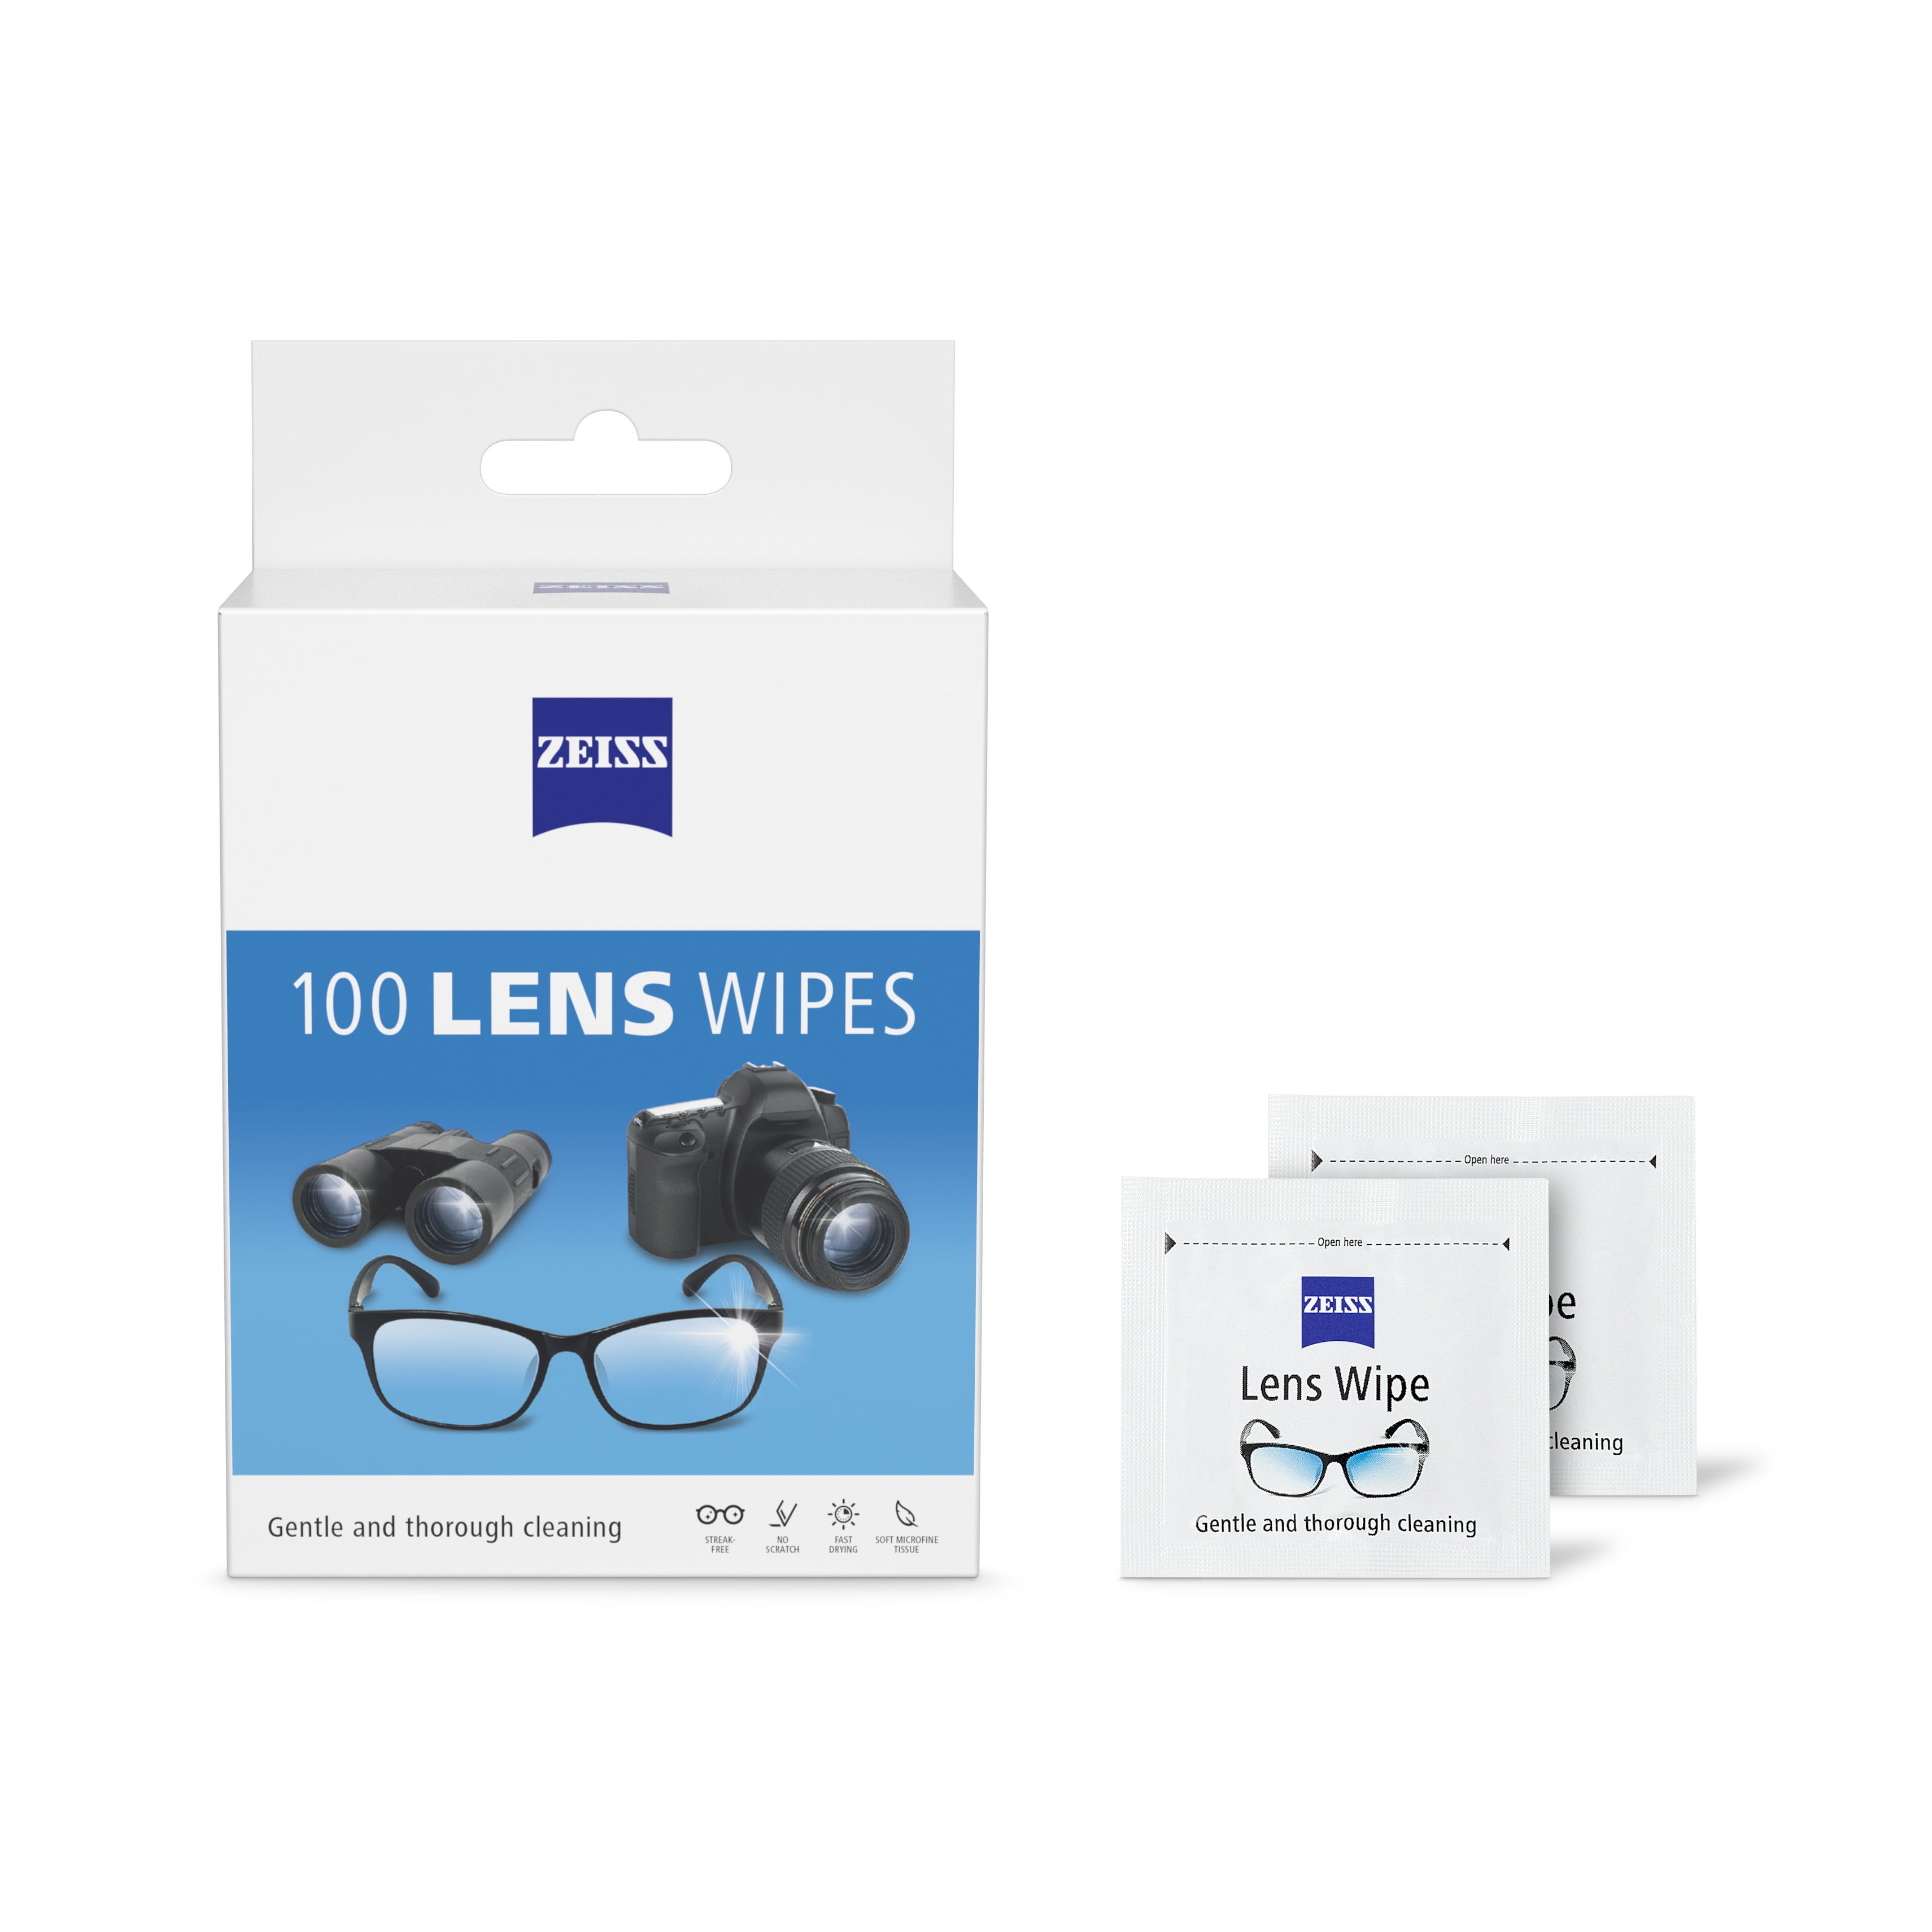 the lens wipes